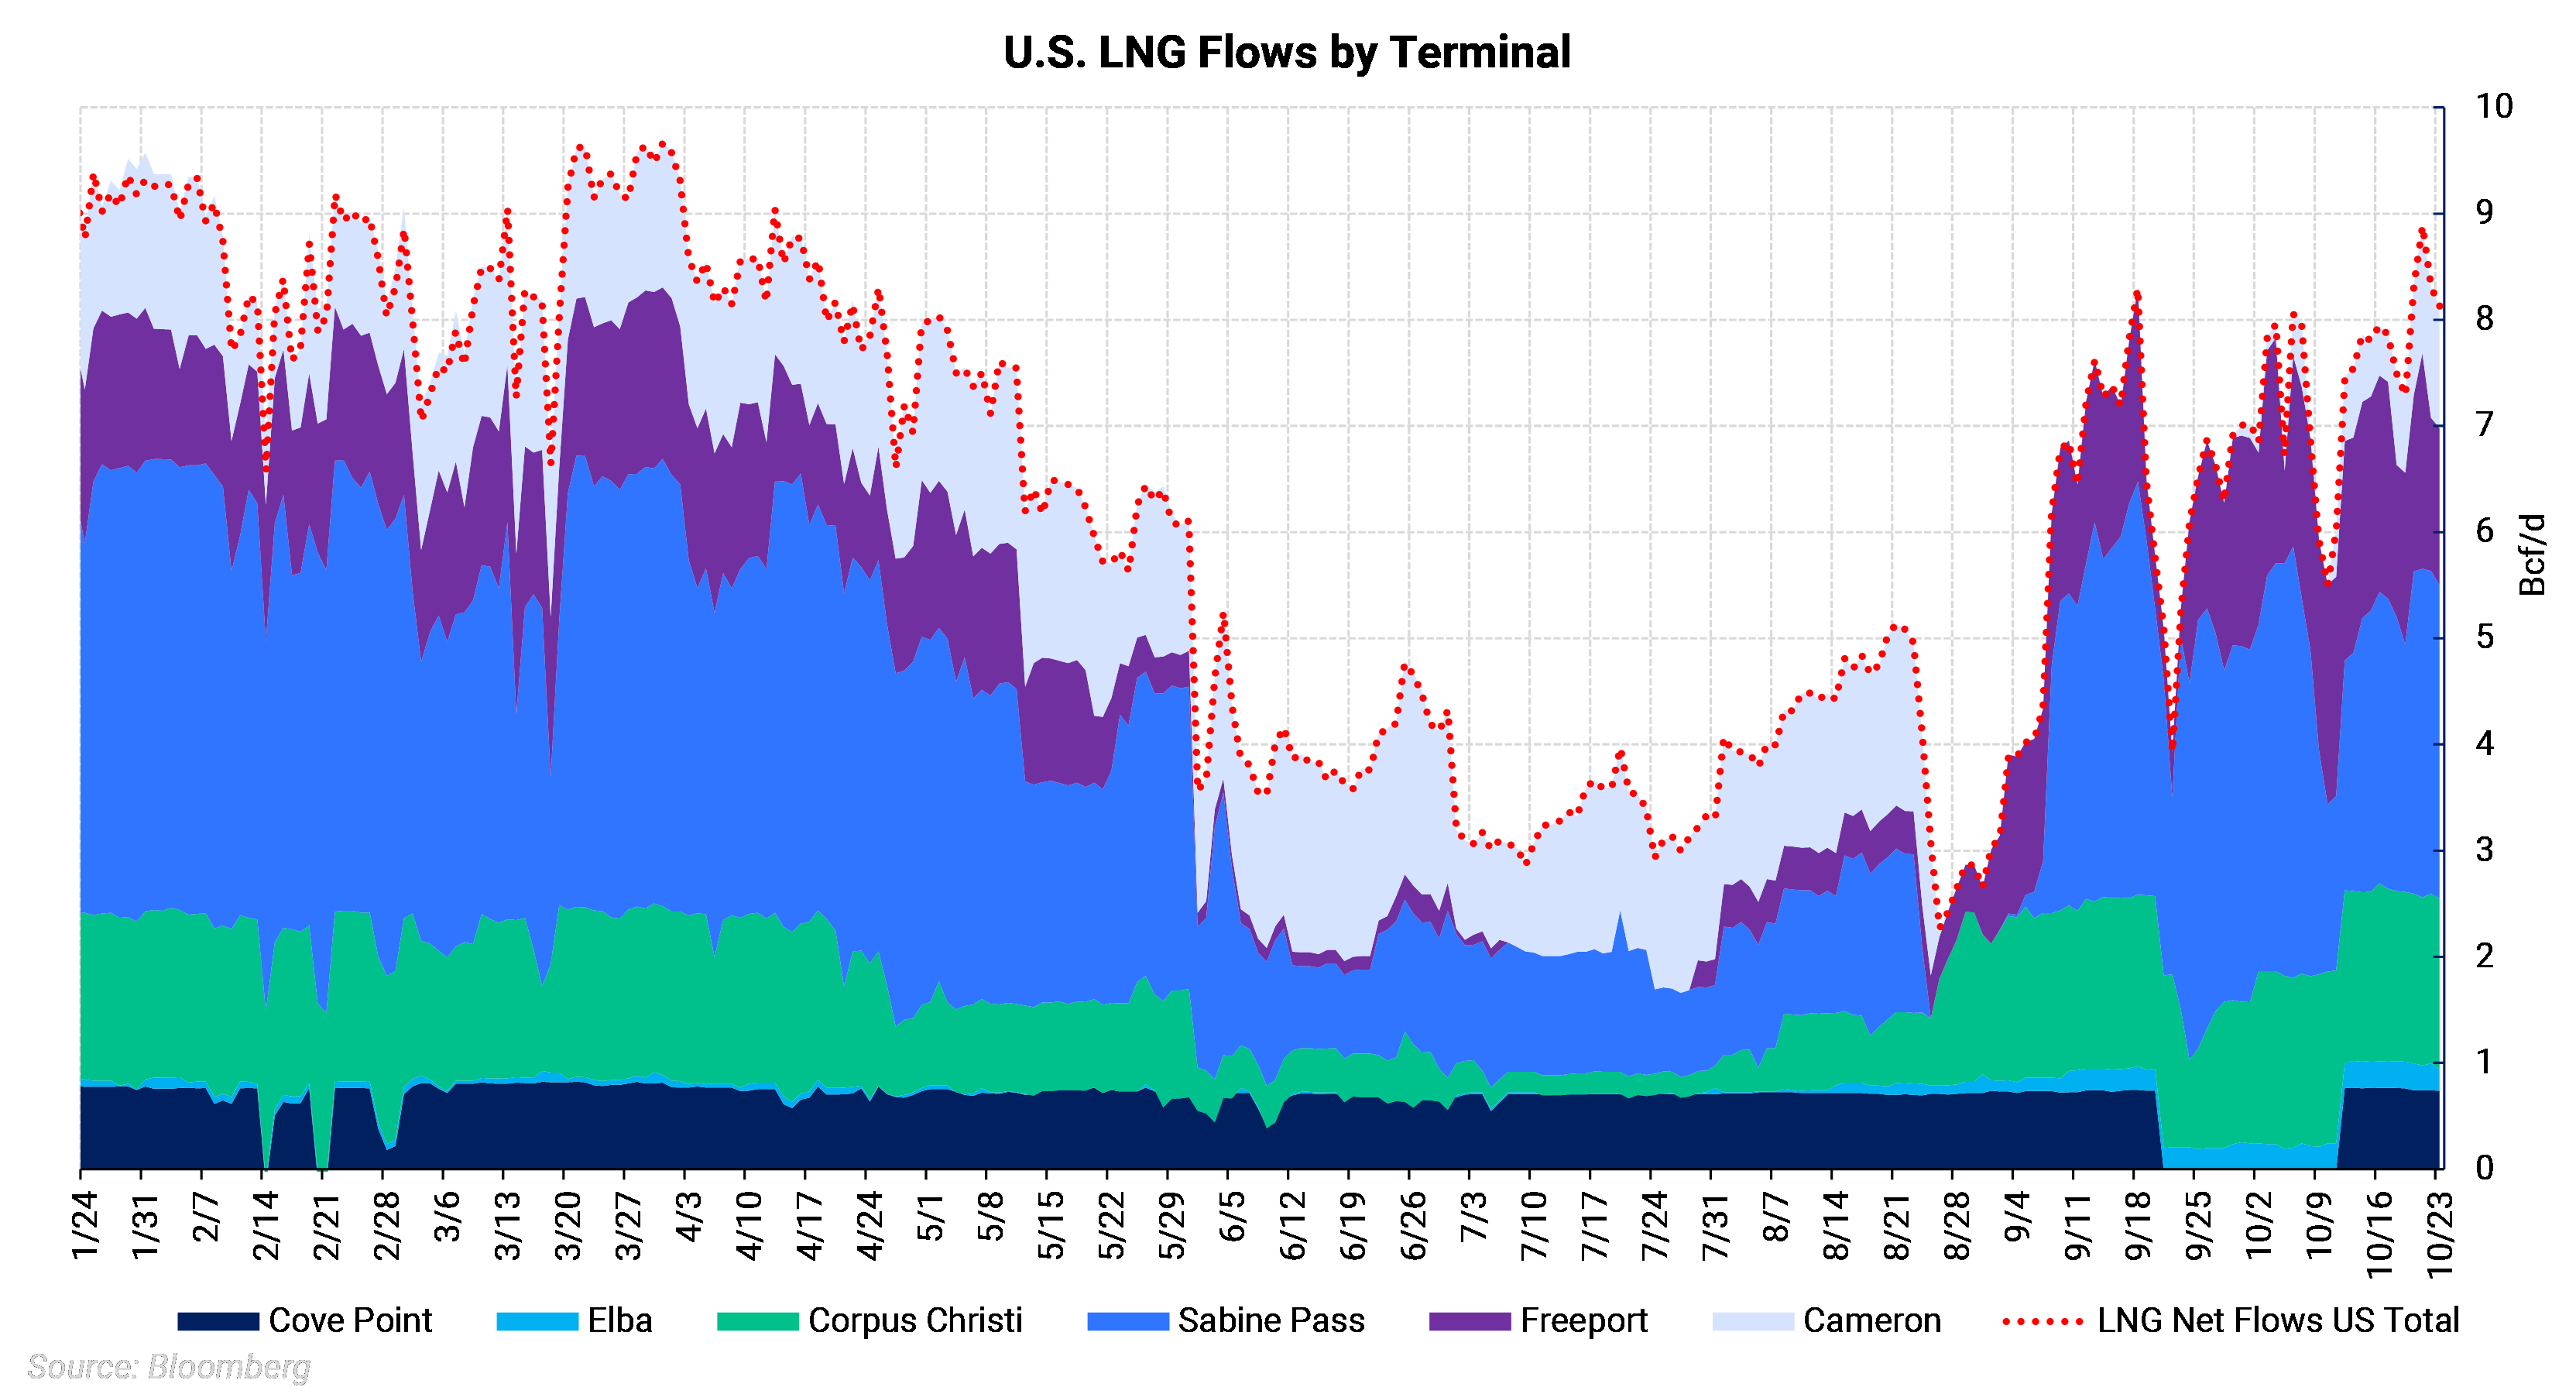 US LNG Flows by Terminal